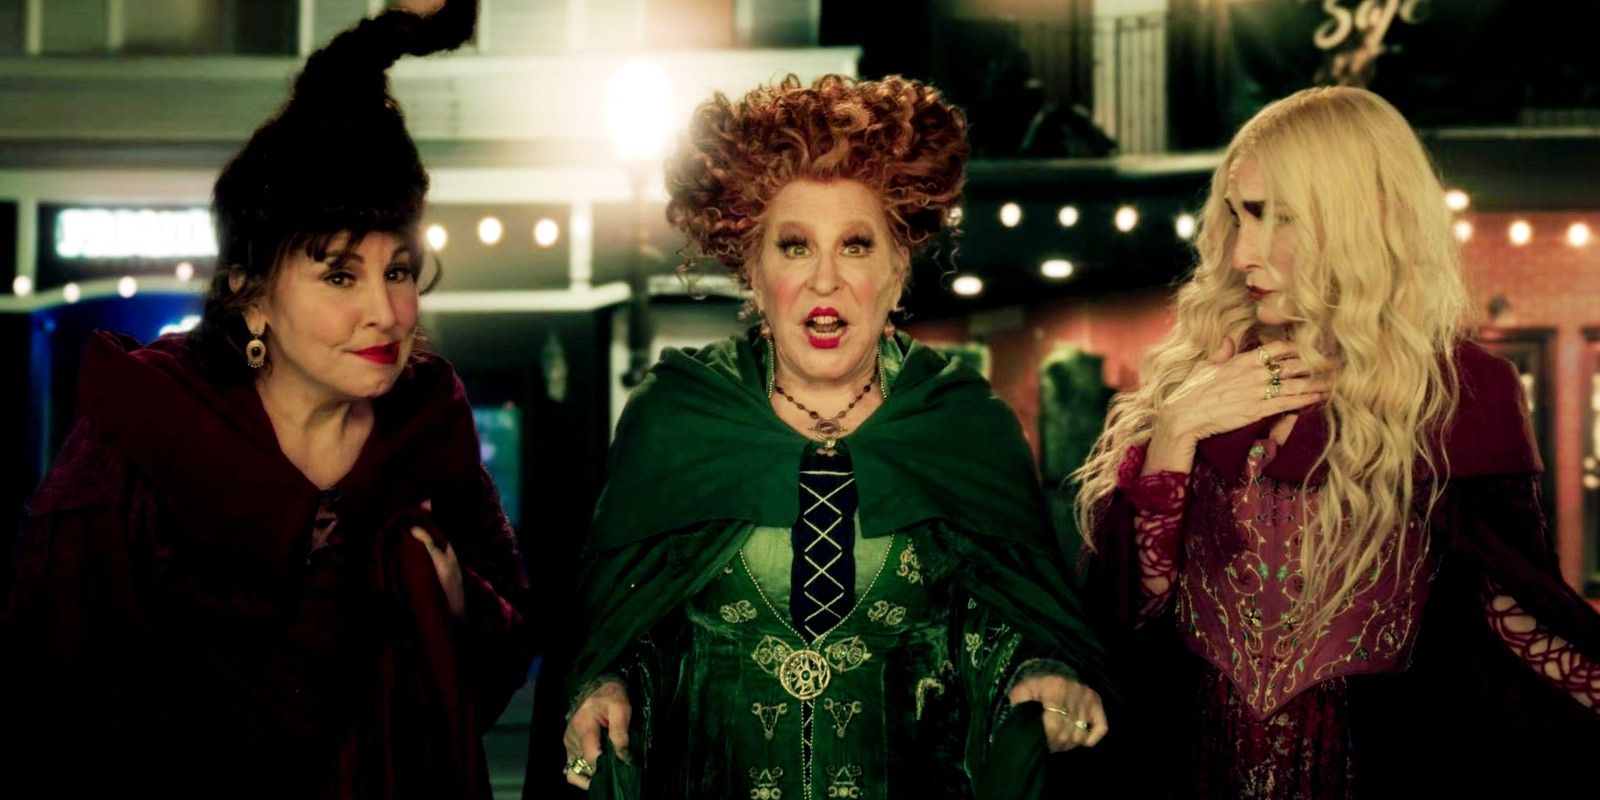 Sanderson sisters walking through the streets in Hocus Pocus 2